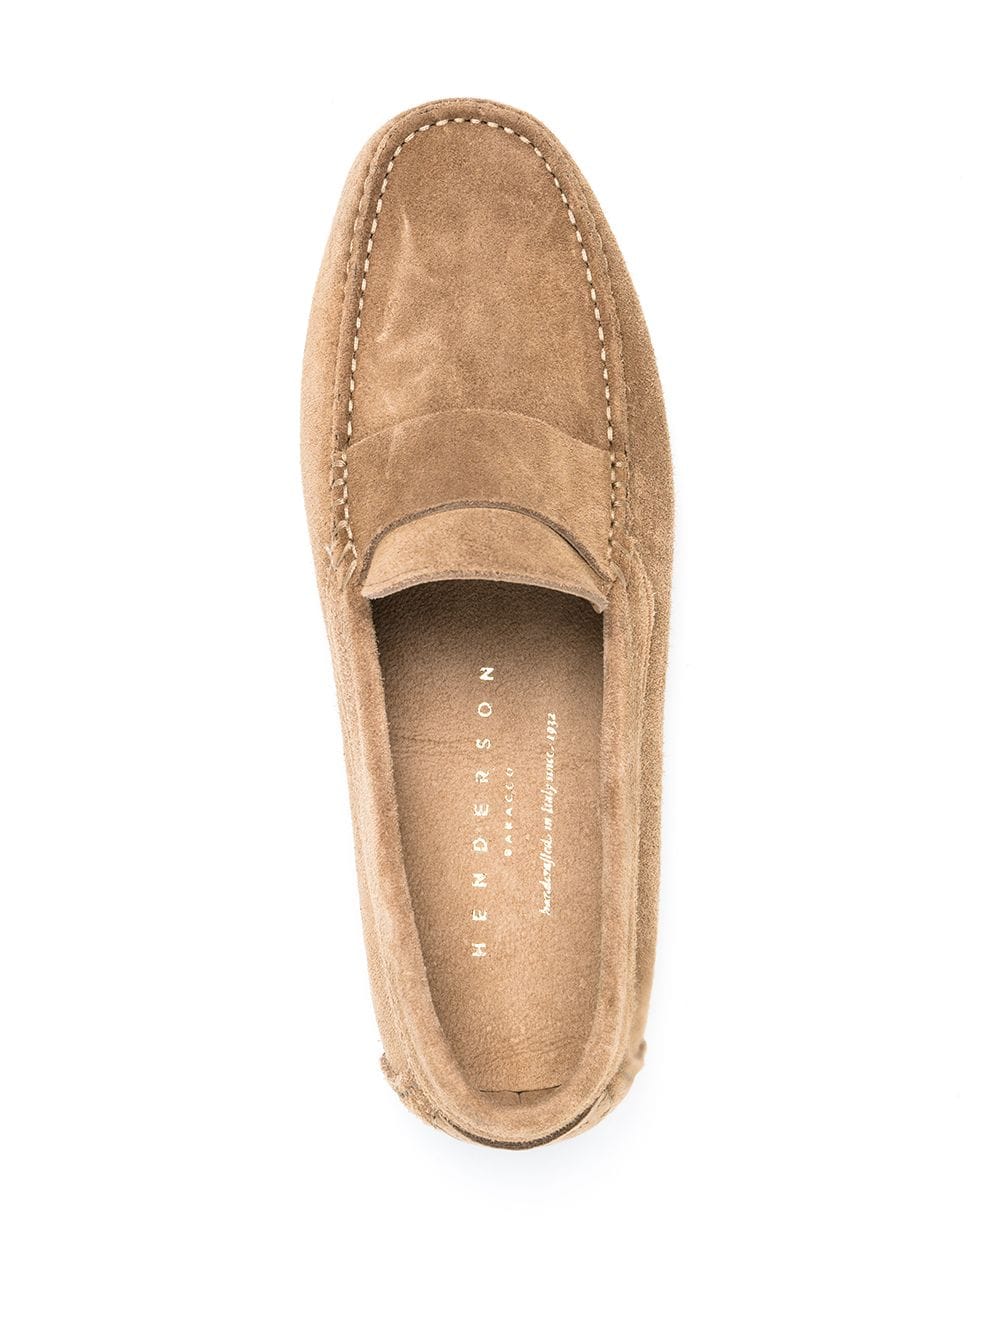 Moccasin before rubber sole